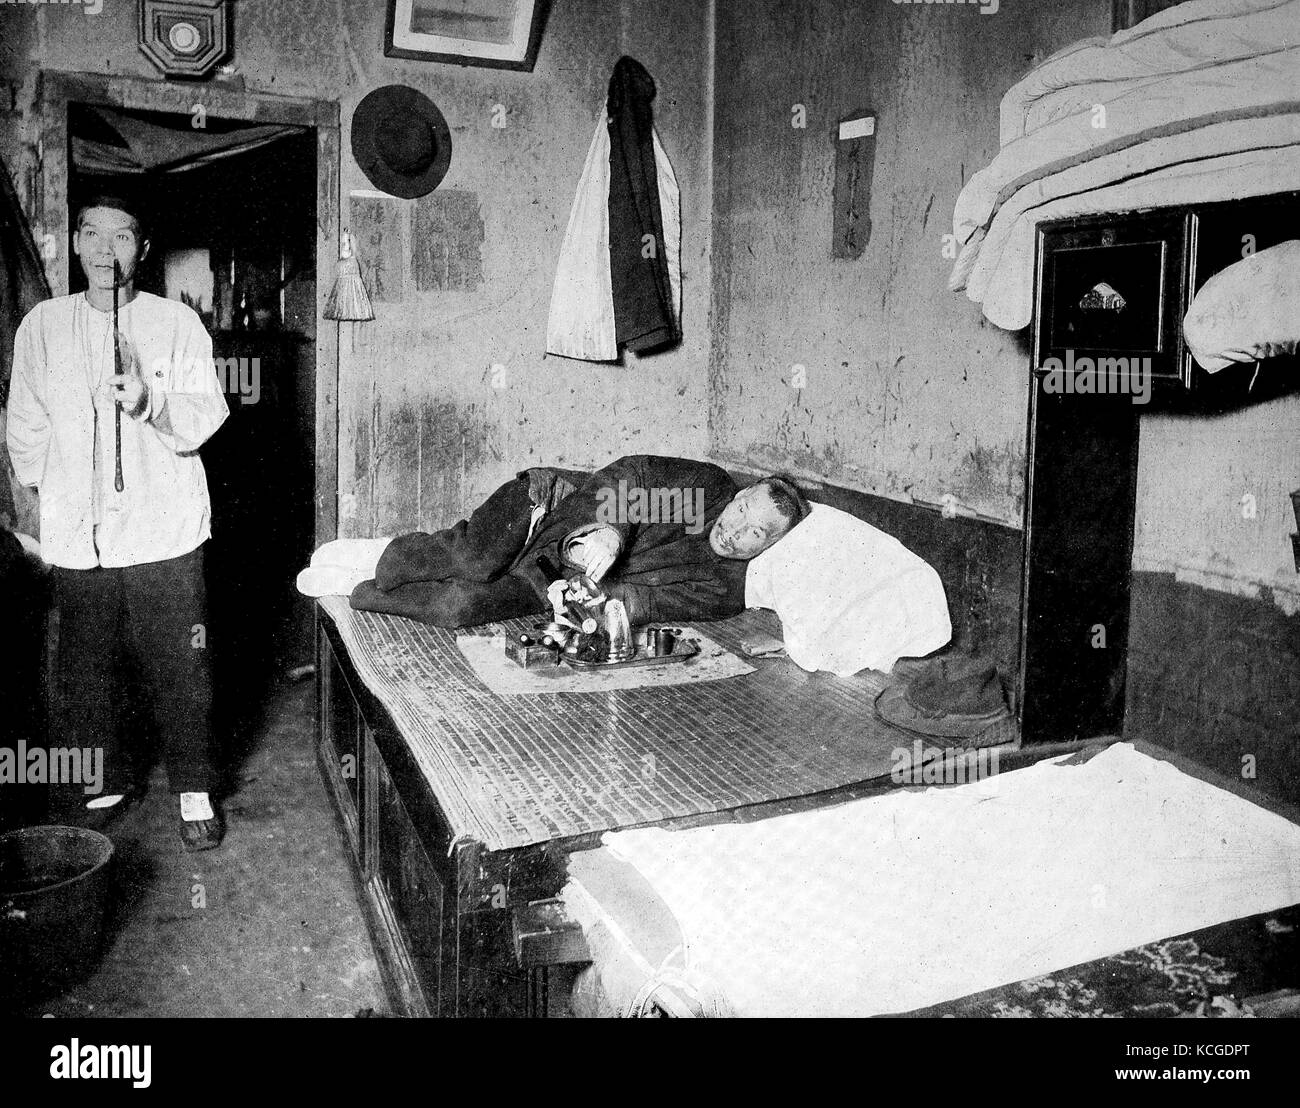 United States of America, opium cave, opium addicts in the Chinese quarter of San Francisco, digital improved reproduction of a historical photo from the (estimated) year 1899 Stock Photo